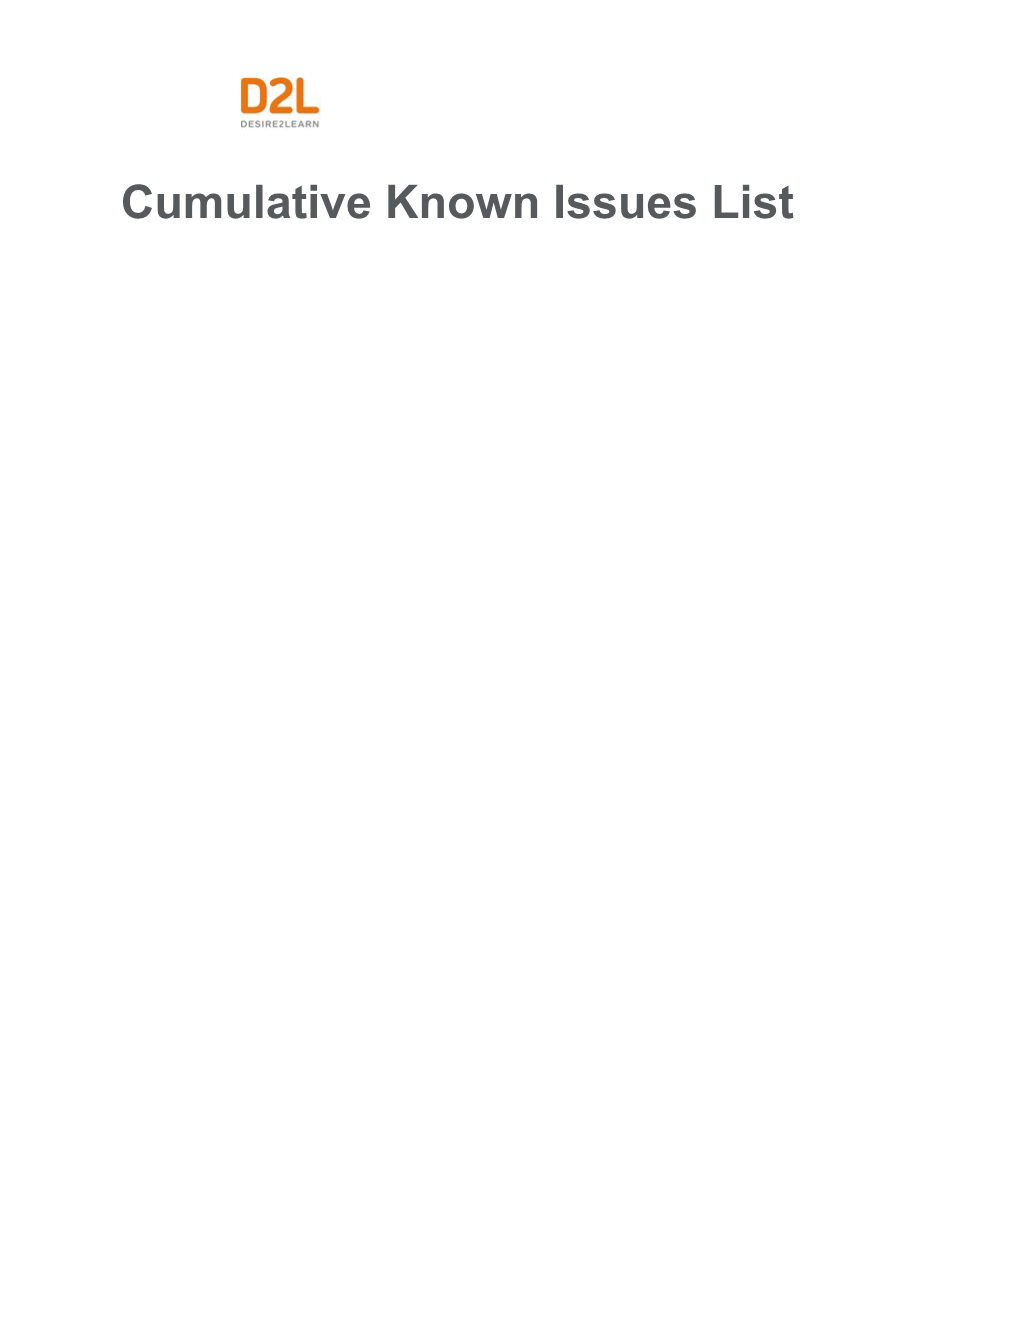 Cumulative Known Issues List